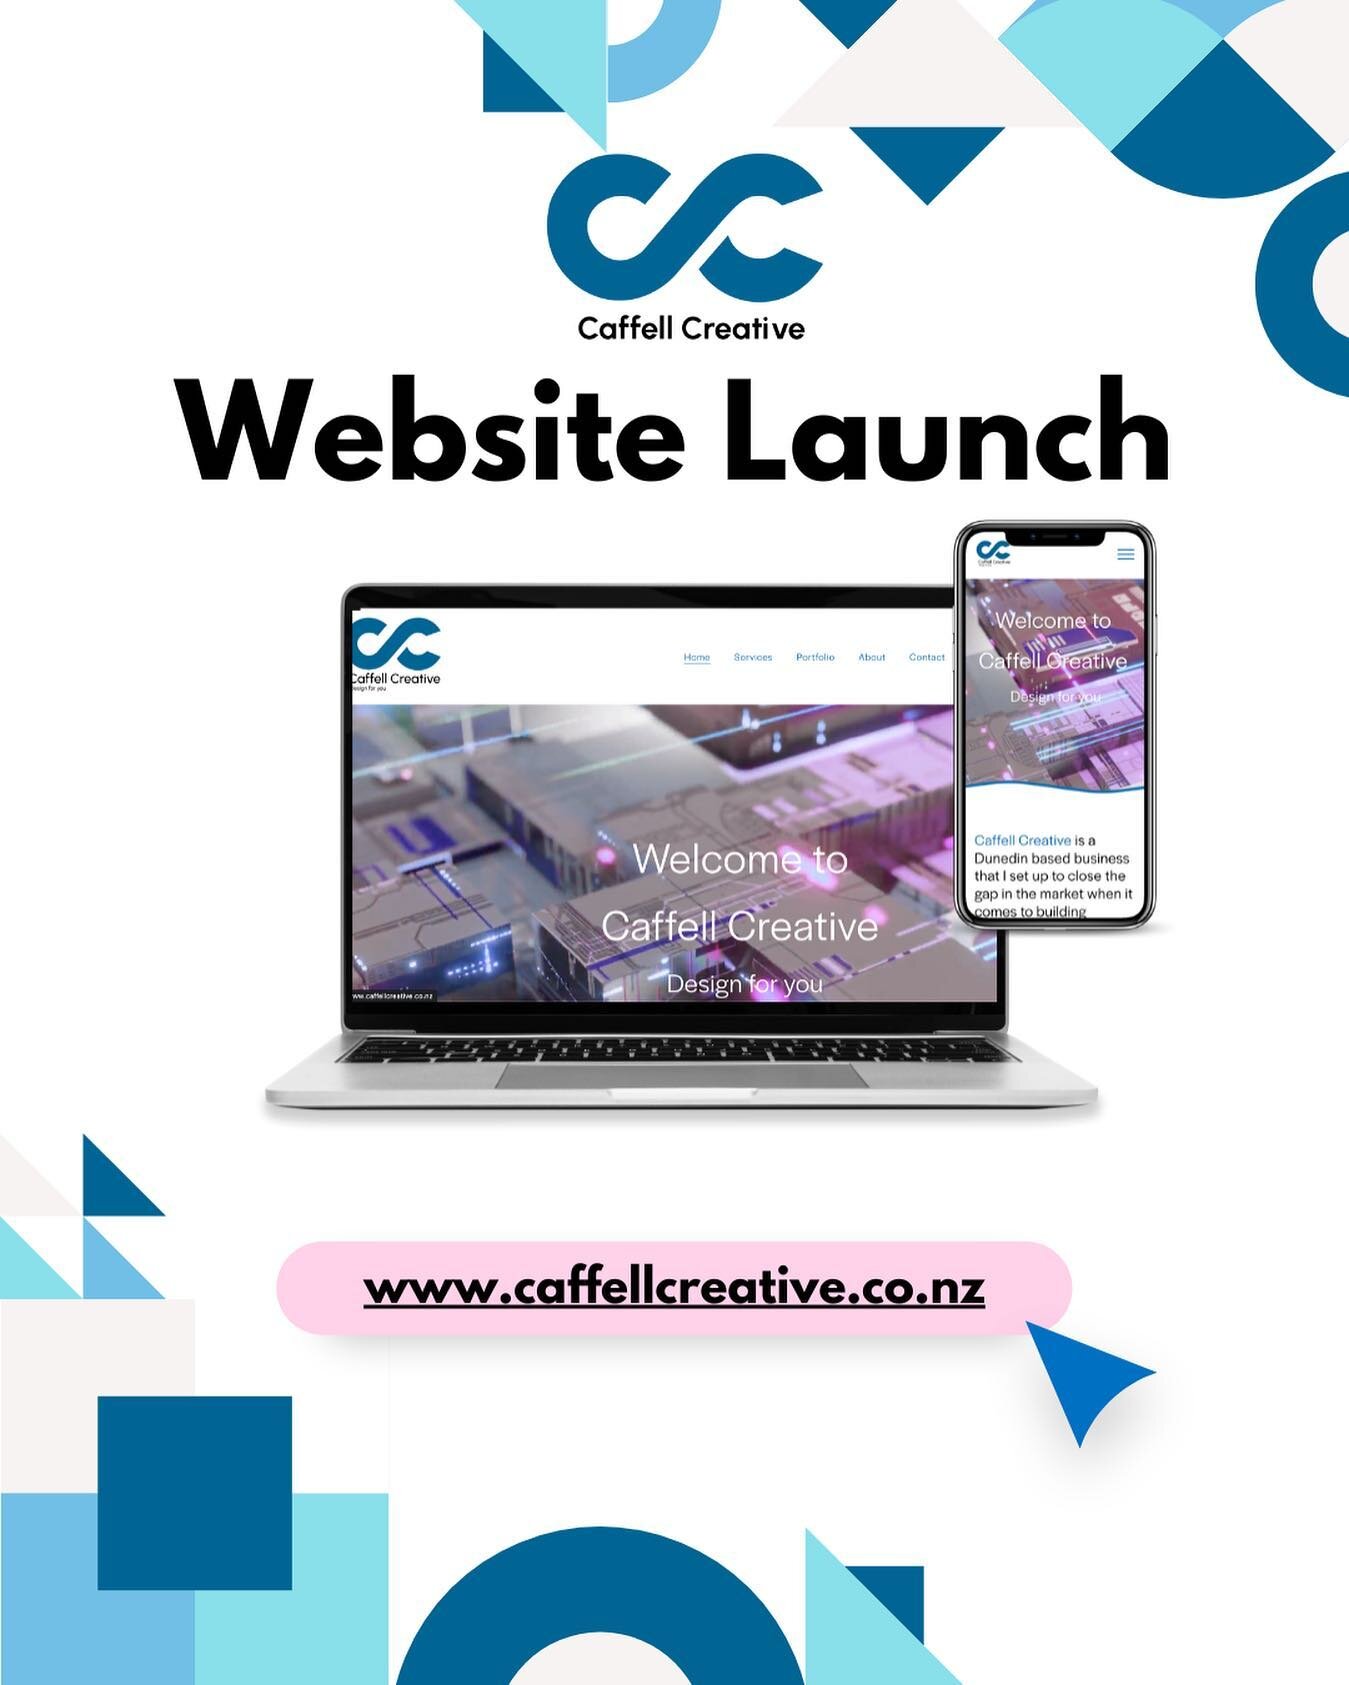 My new website is live!! If you need help with your website or anything else for your business please feel free to contact me!! www.caffellcreative.co.nz